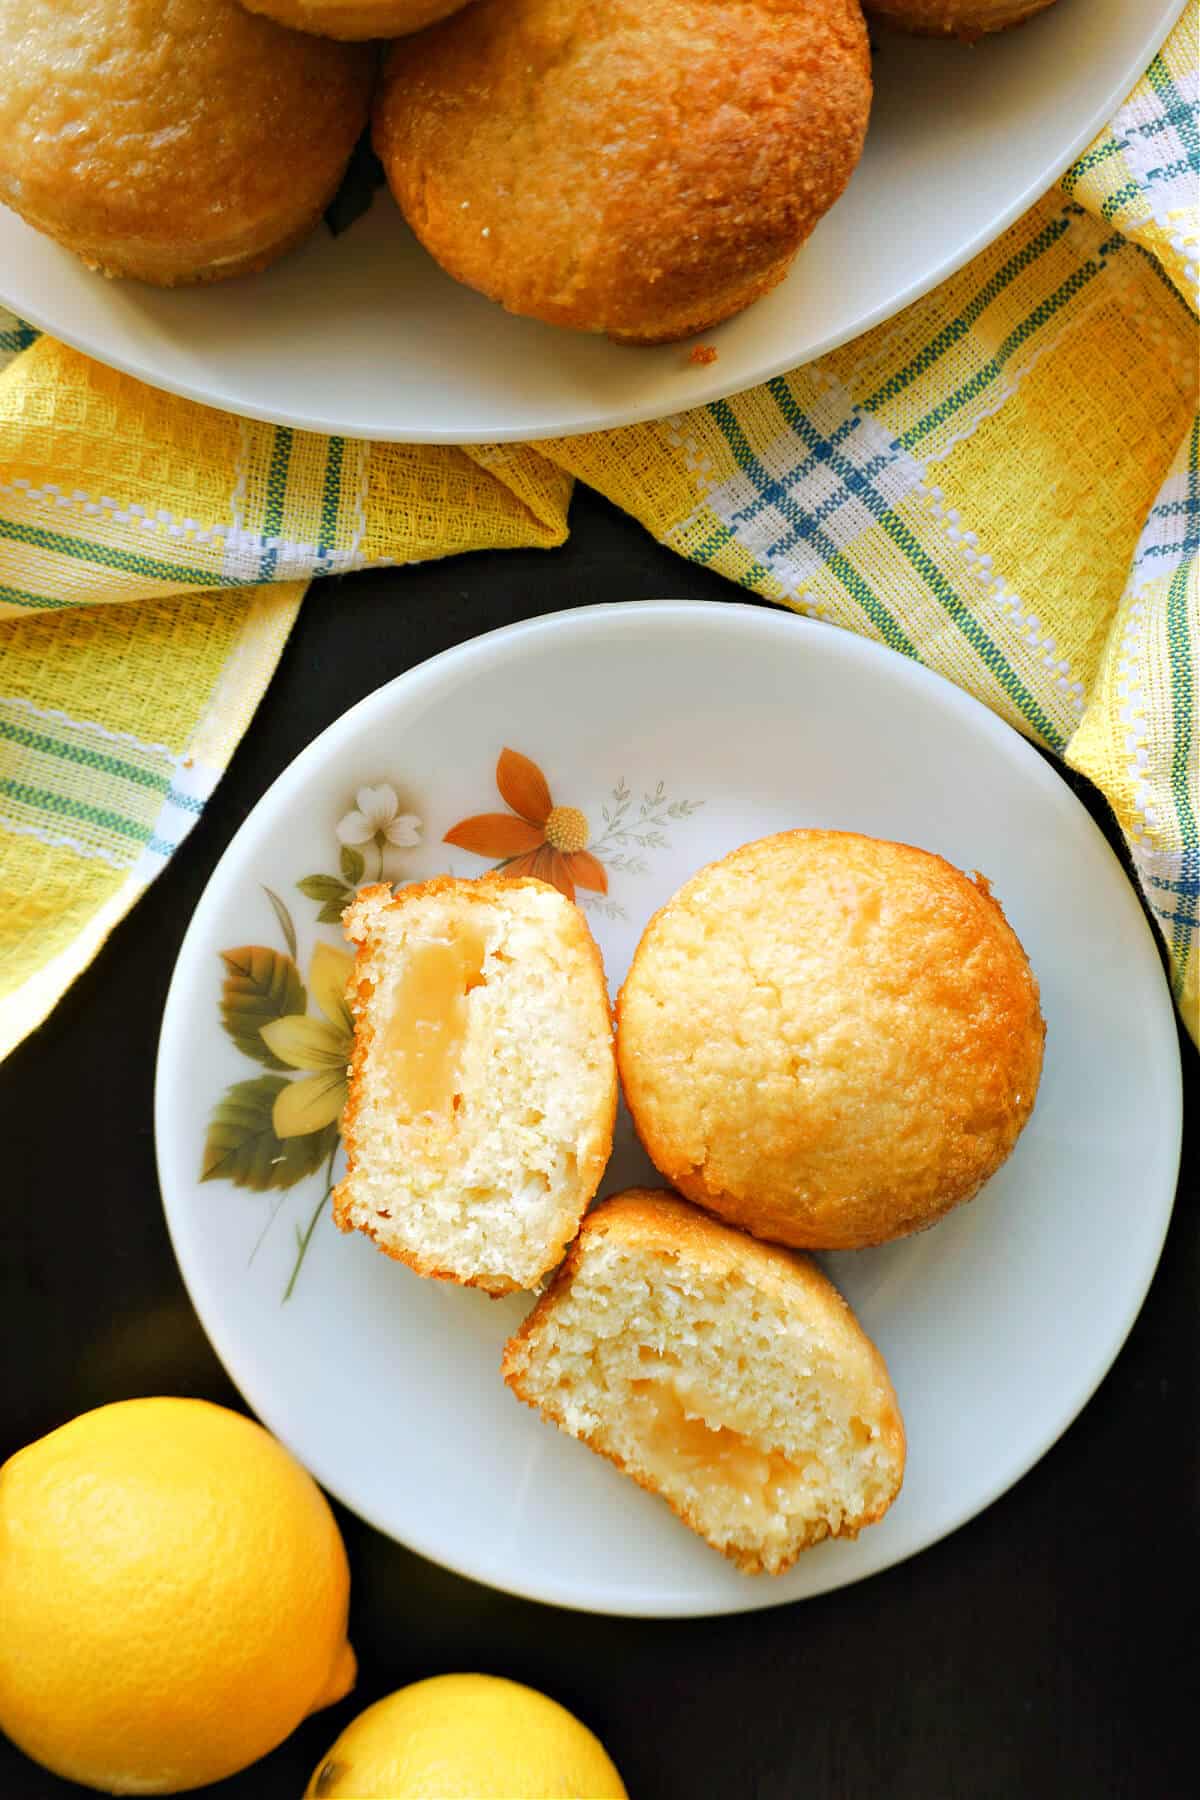 Overhead shoot of a white plate with 2 halves of a lemon muffin and a whole muffin.